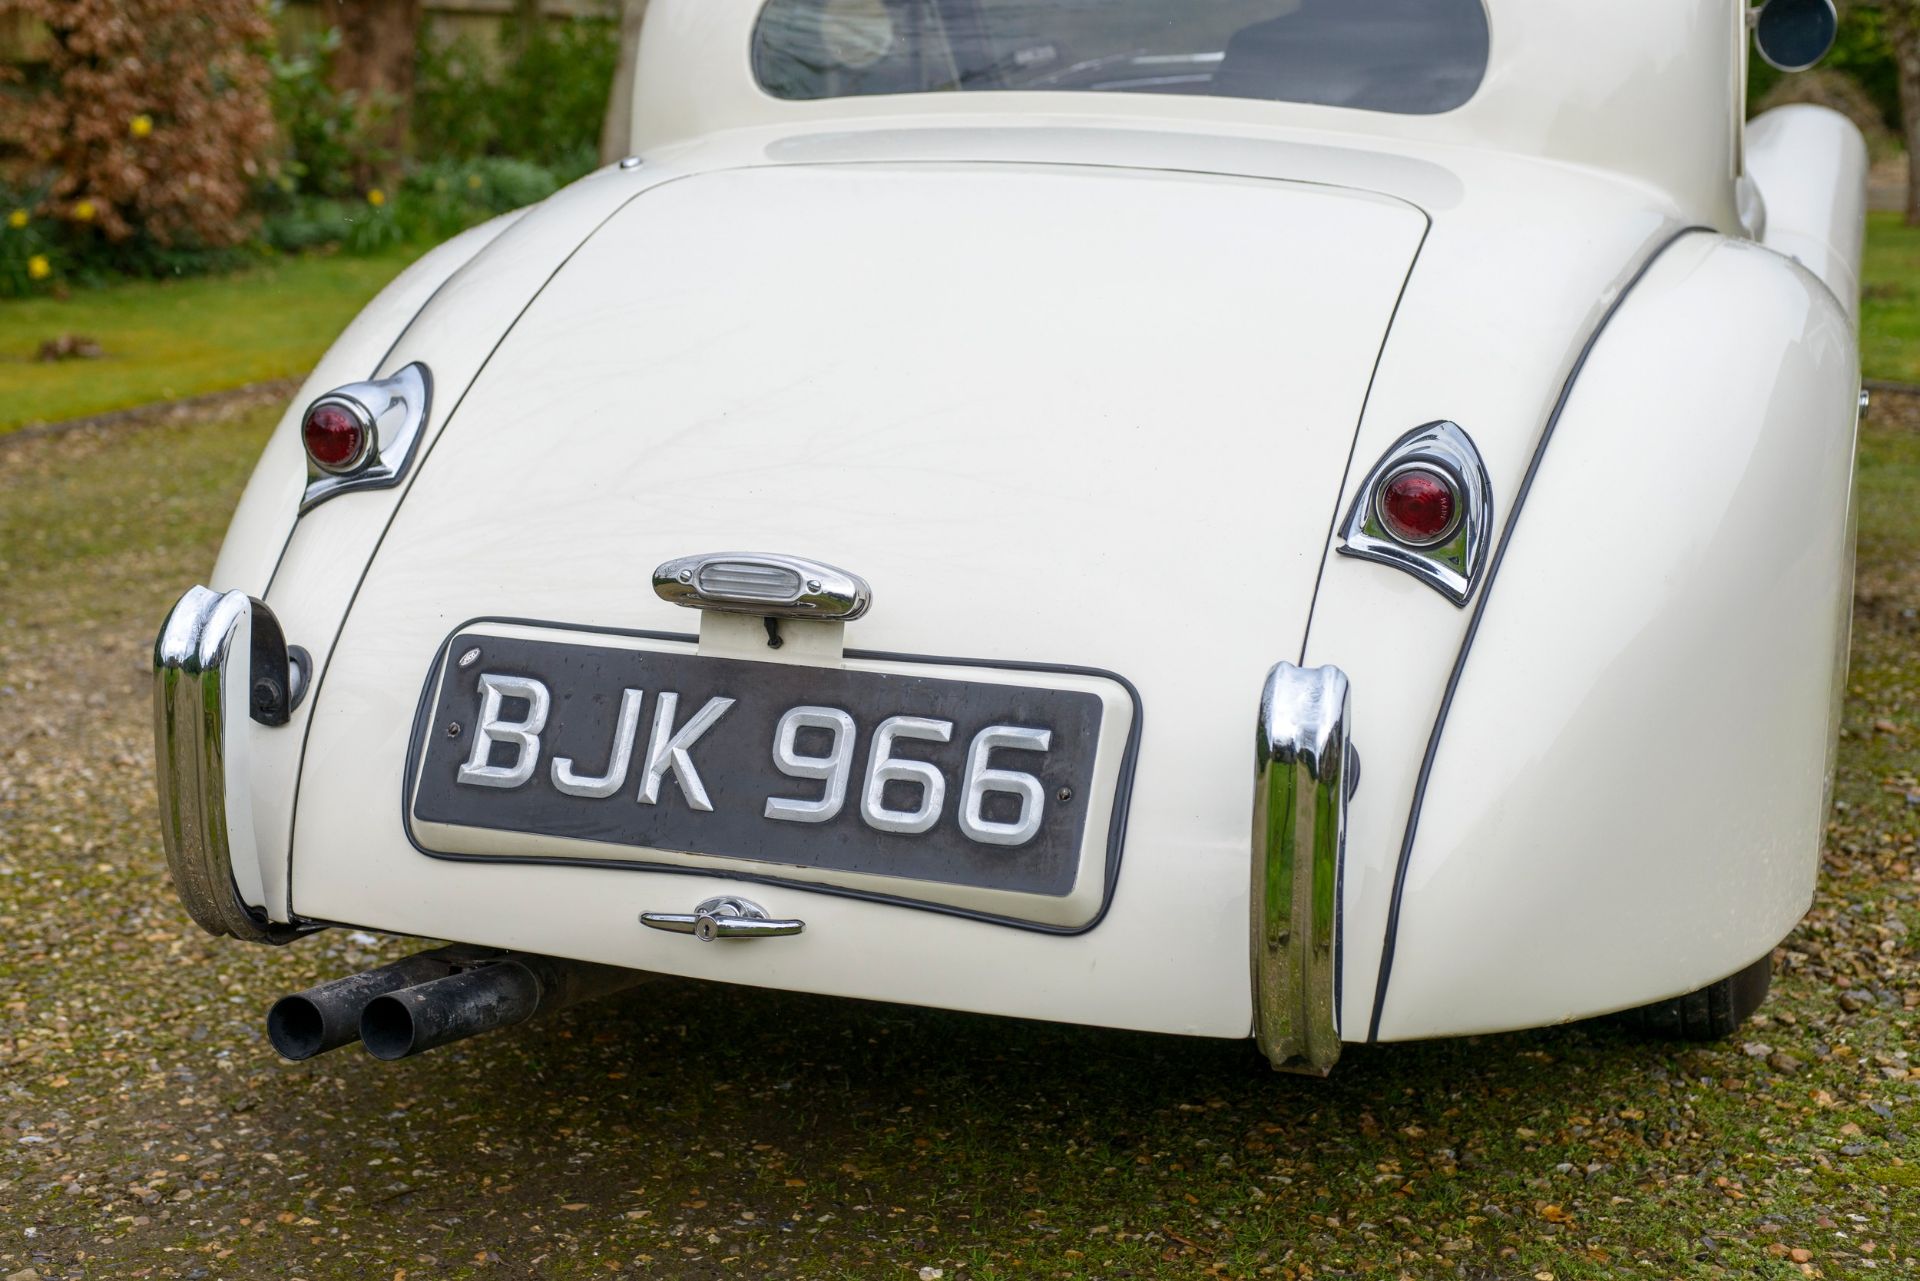 1954 JAGUAR XK120 FIXED HEAD COUPE Registration Number: BJK 966 Chassis Number: 669158 Recorded - Image 12 of 61